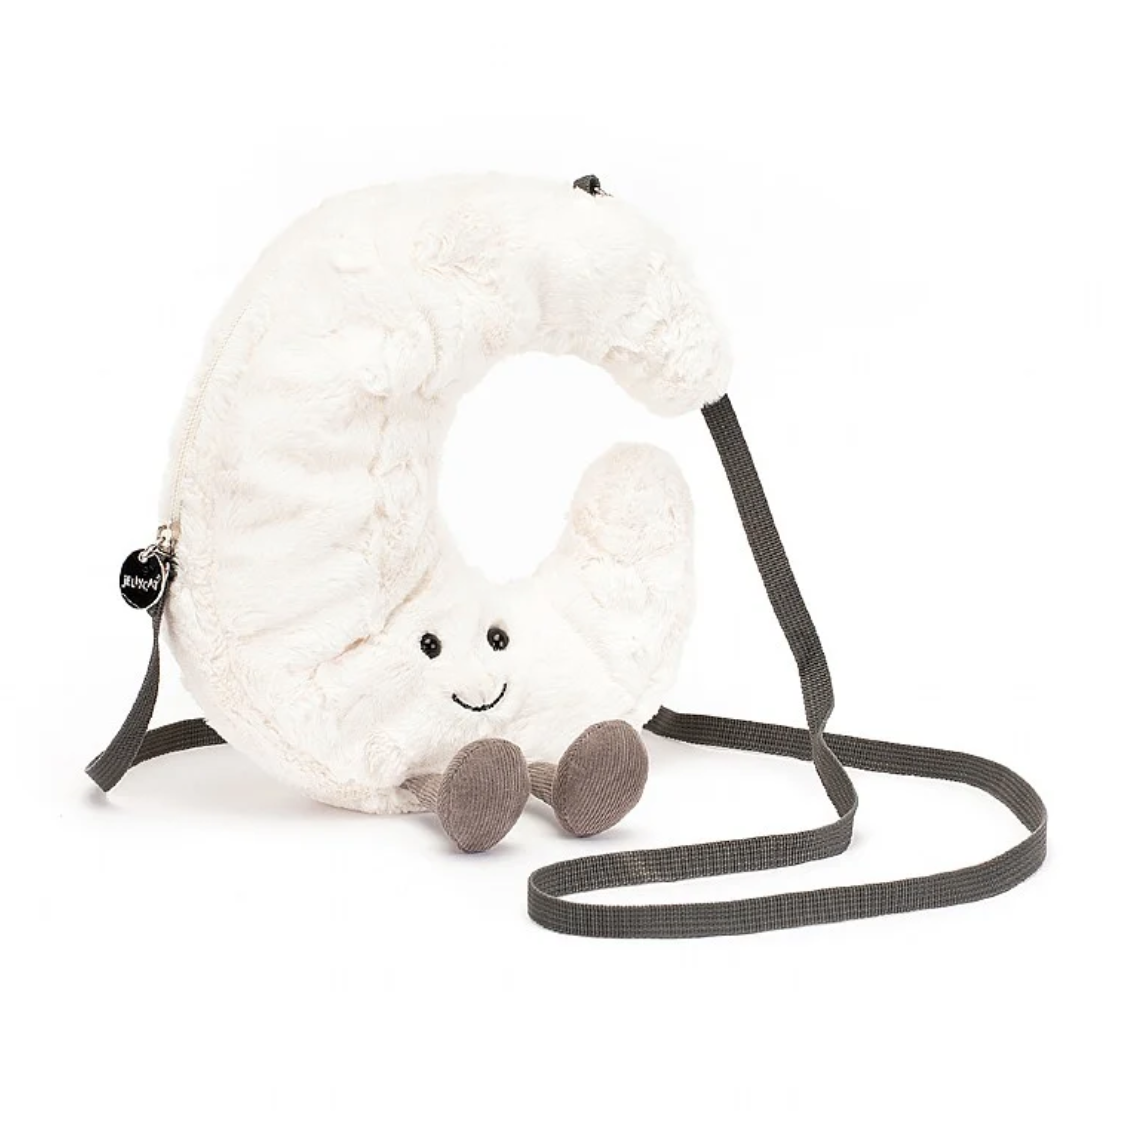 A plush, crescent-shaped Amuseable Moon Bag with a smiling face and little feet, attached to a gray carrying strap styled like Arizona bungalow architecture, against a white background. (Brand Name: Jelly Cat Inc.)